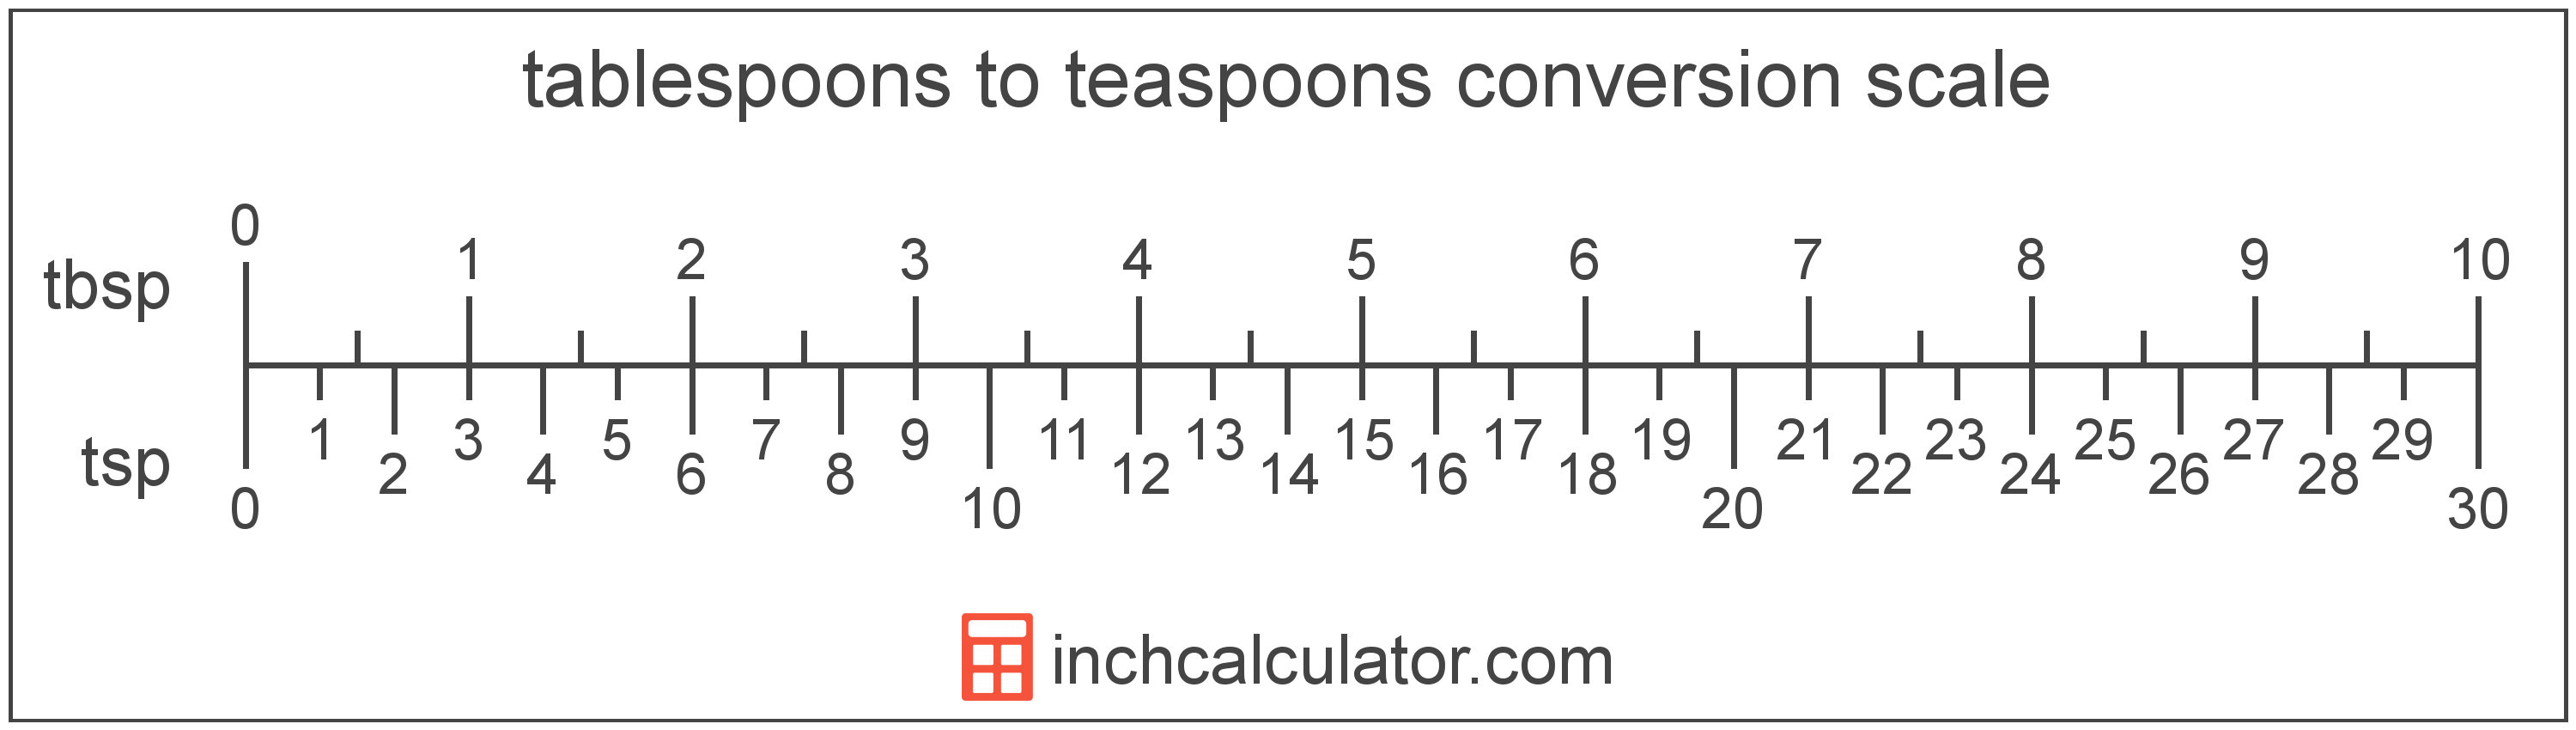 https://www.inchcalculator.com/a/img/unit-conversion/tablespoon-to-teaspoon-conversion-scale.png